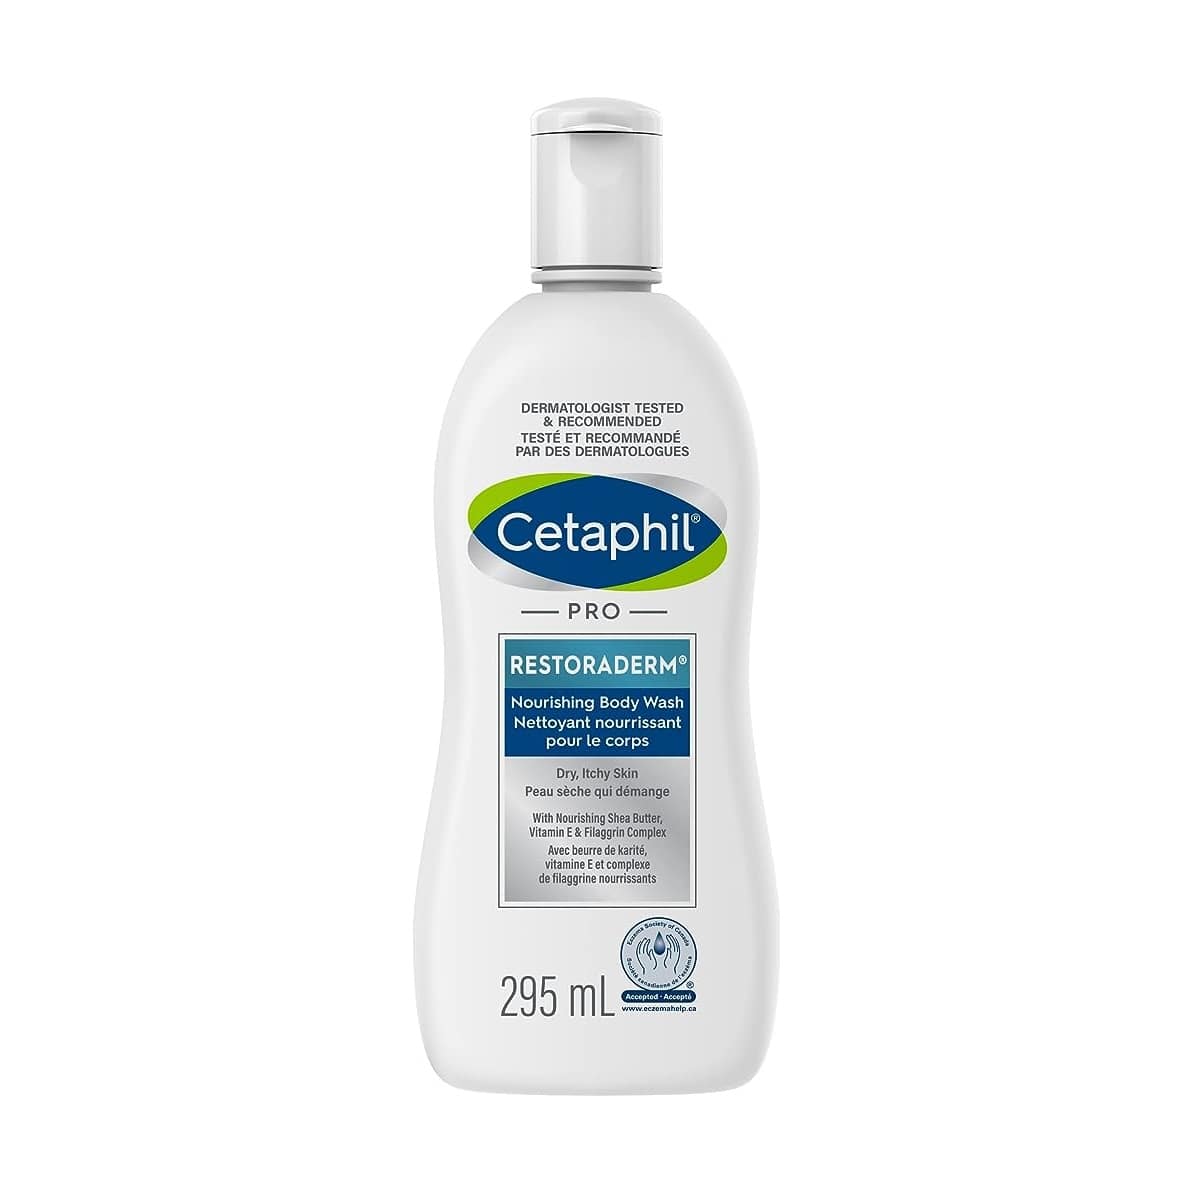 Product label for Cetaphil Restoraderm Nourishing Body Wash for Dry, Itchy Skin (295 mL)